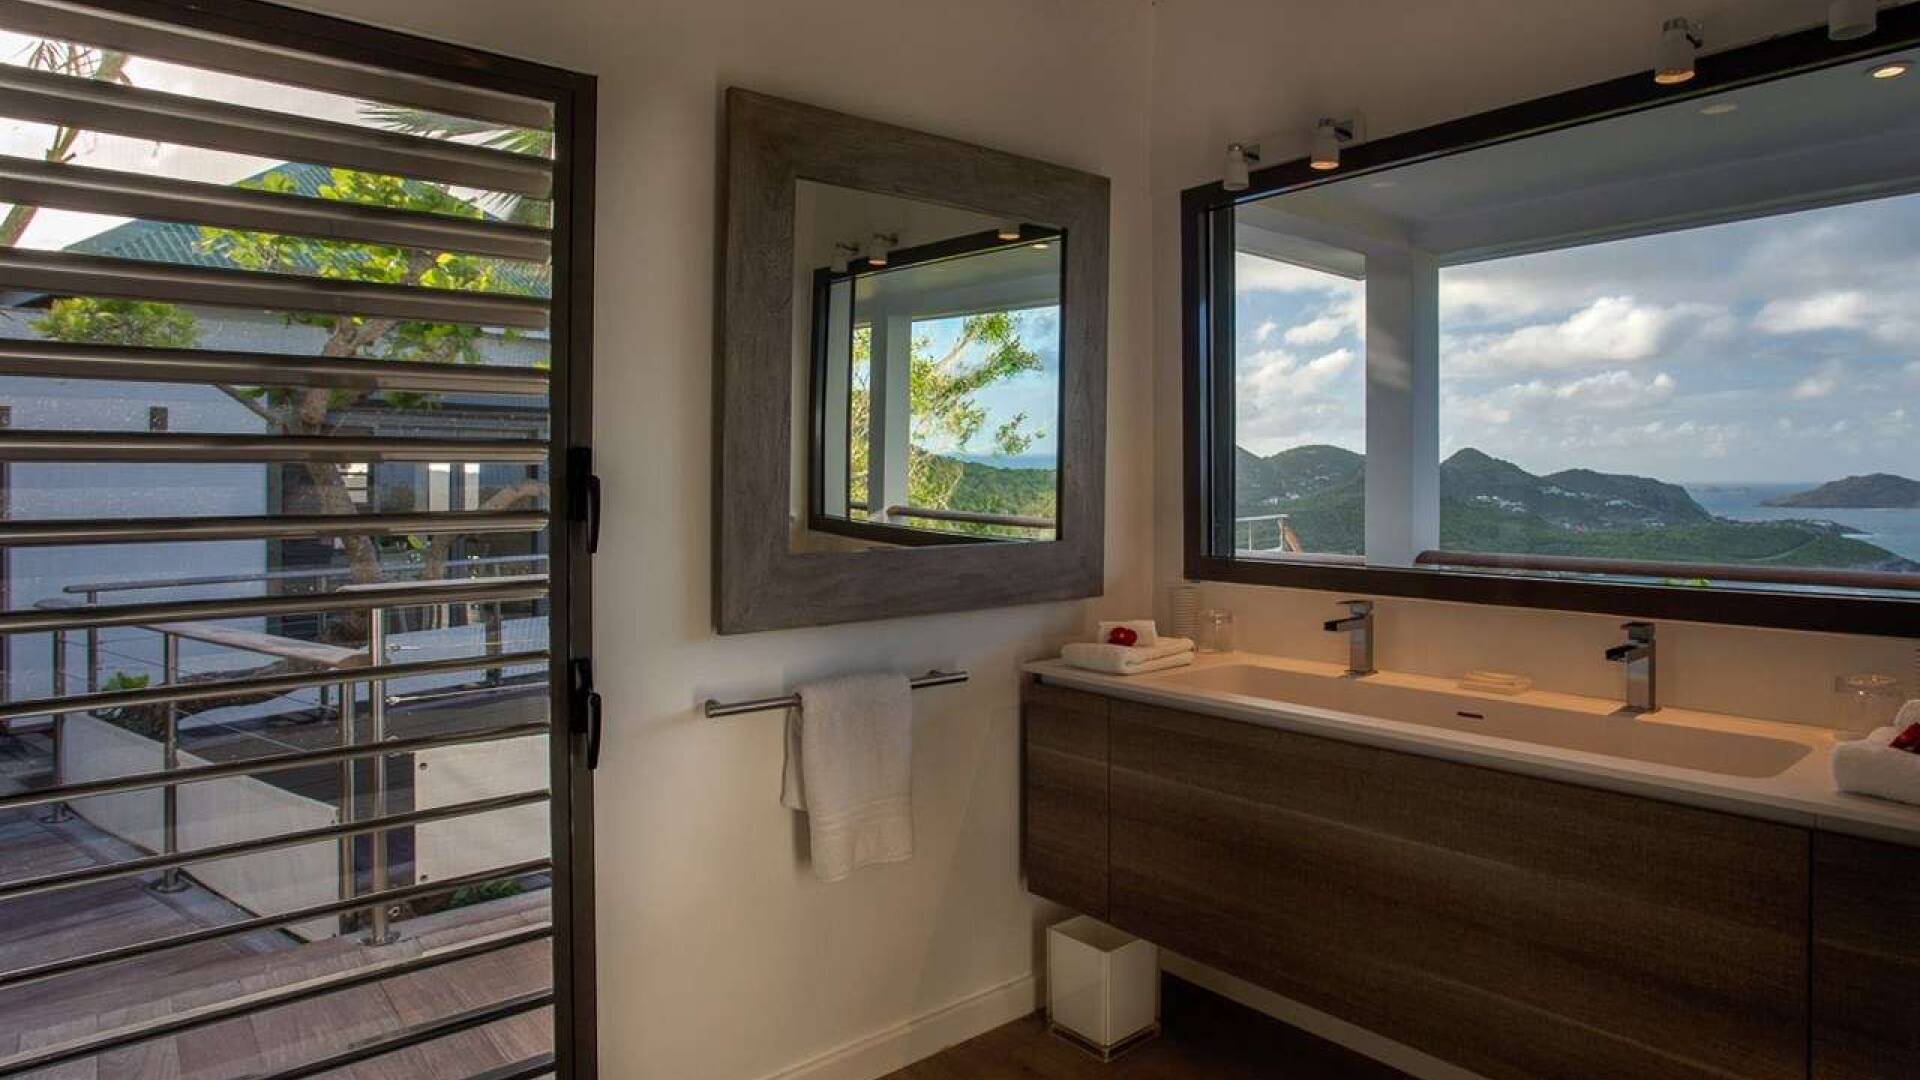 Bathroom at WV IEW, St. Jean, St. Barthelemy